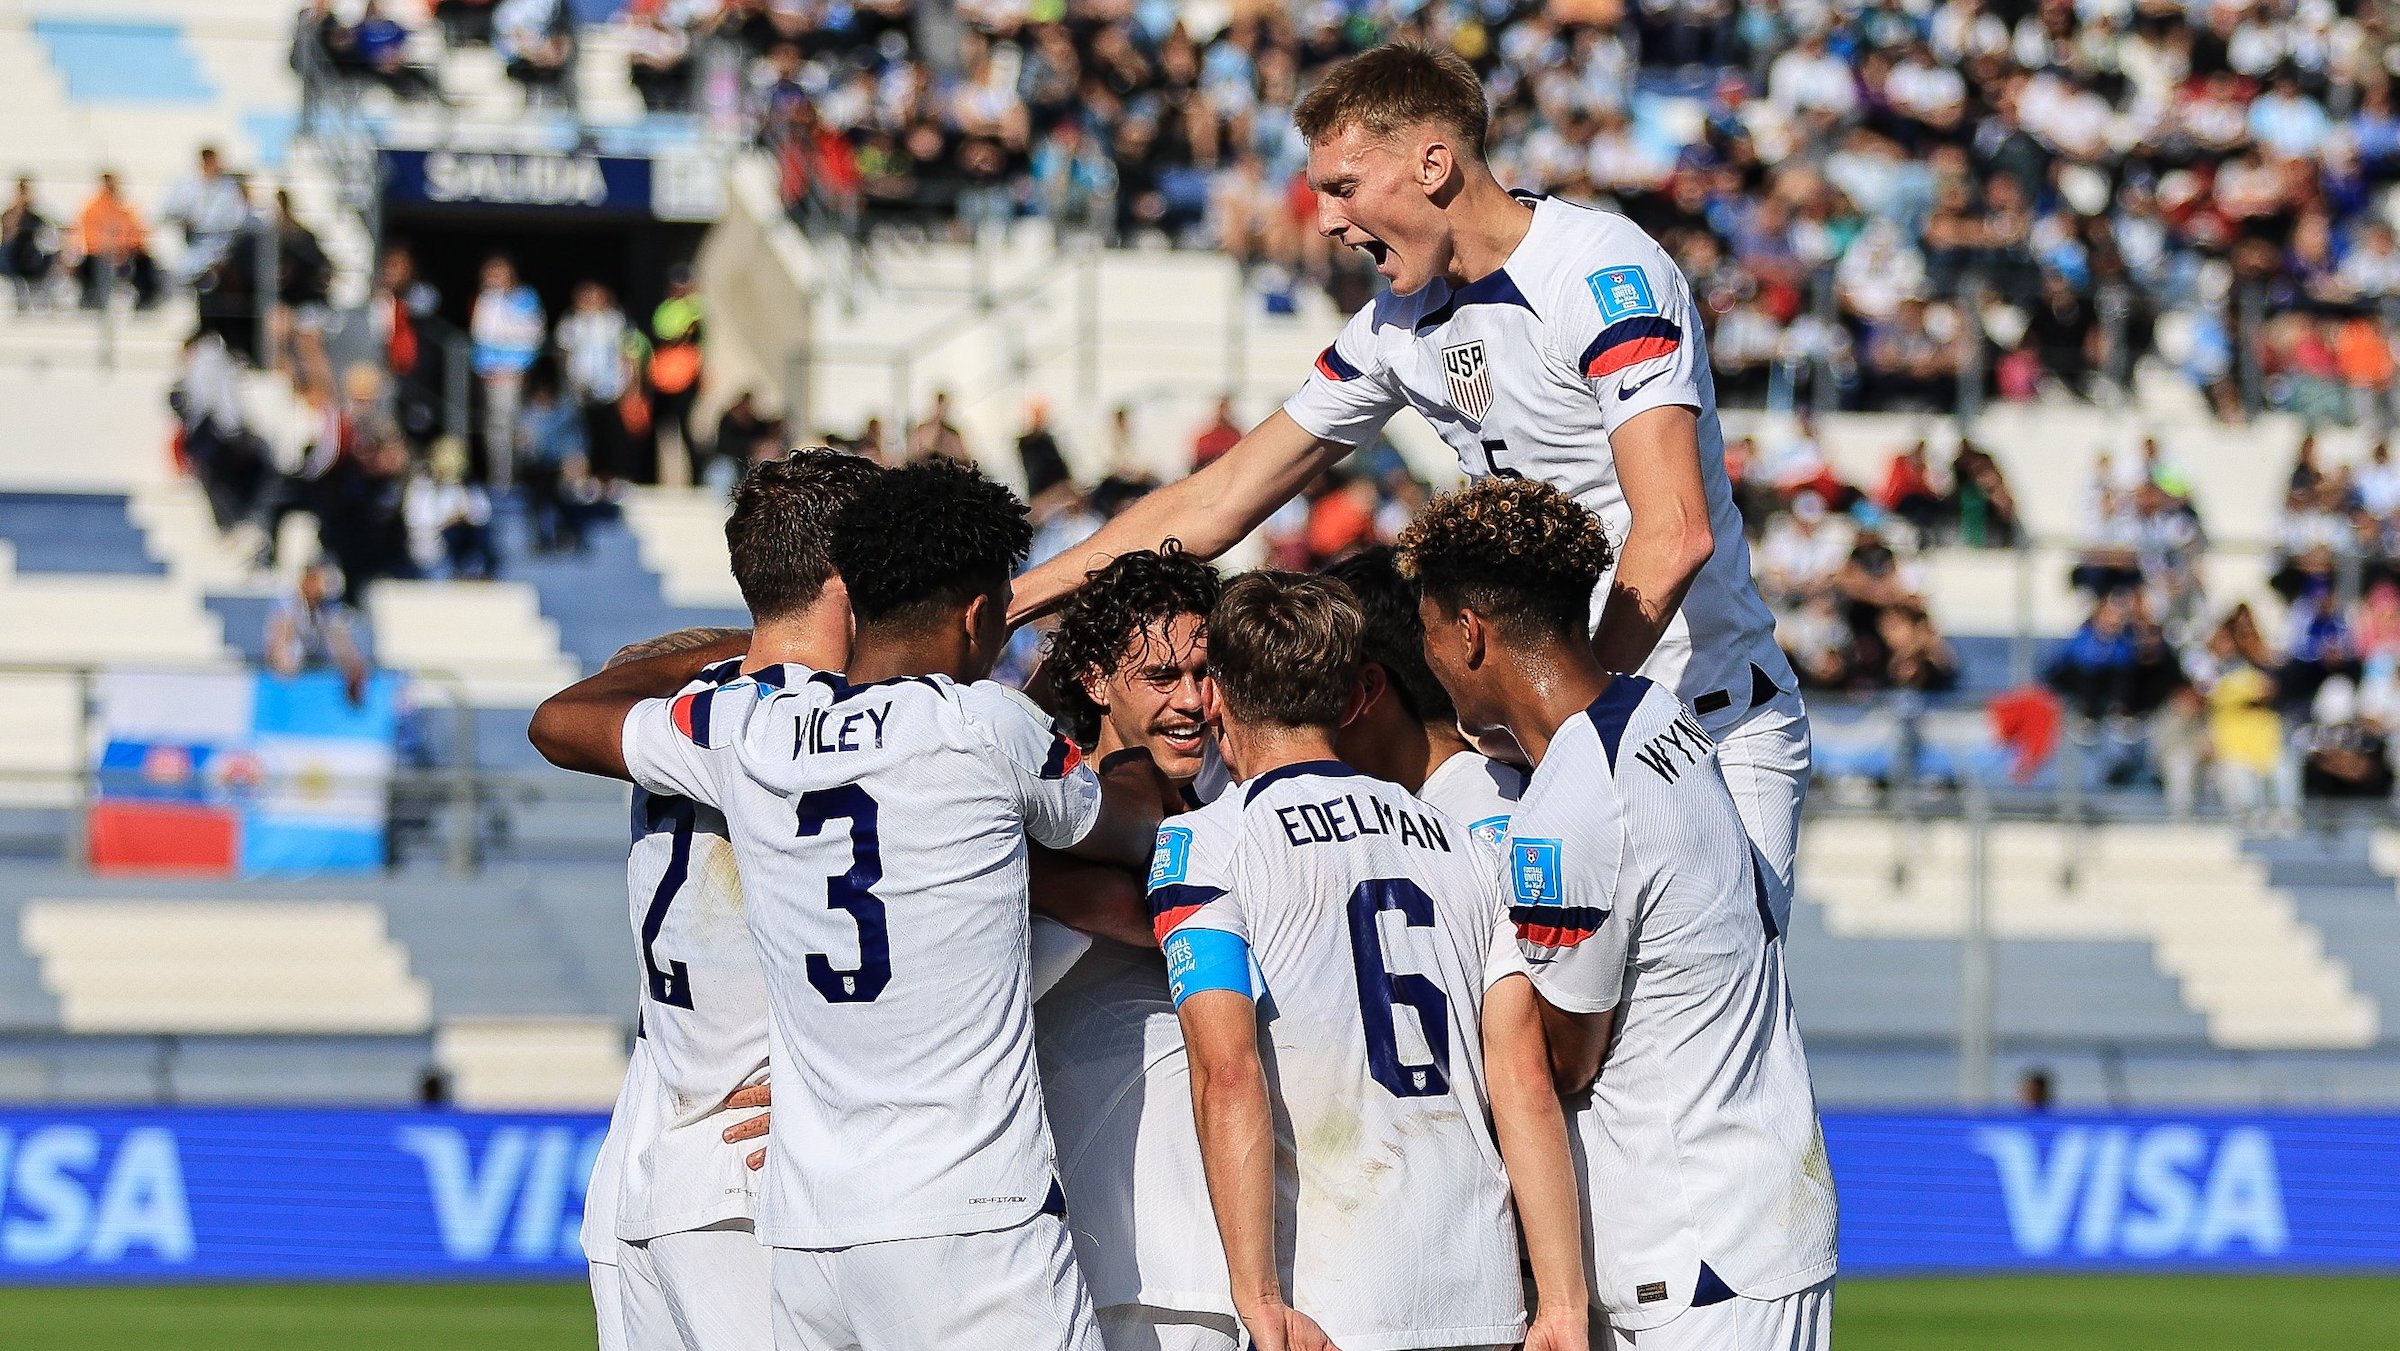 USA finishes perfect run in Group B at FIFA U-20 World Cup with 2-0 win over Slovakia